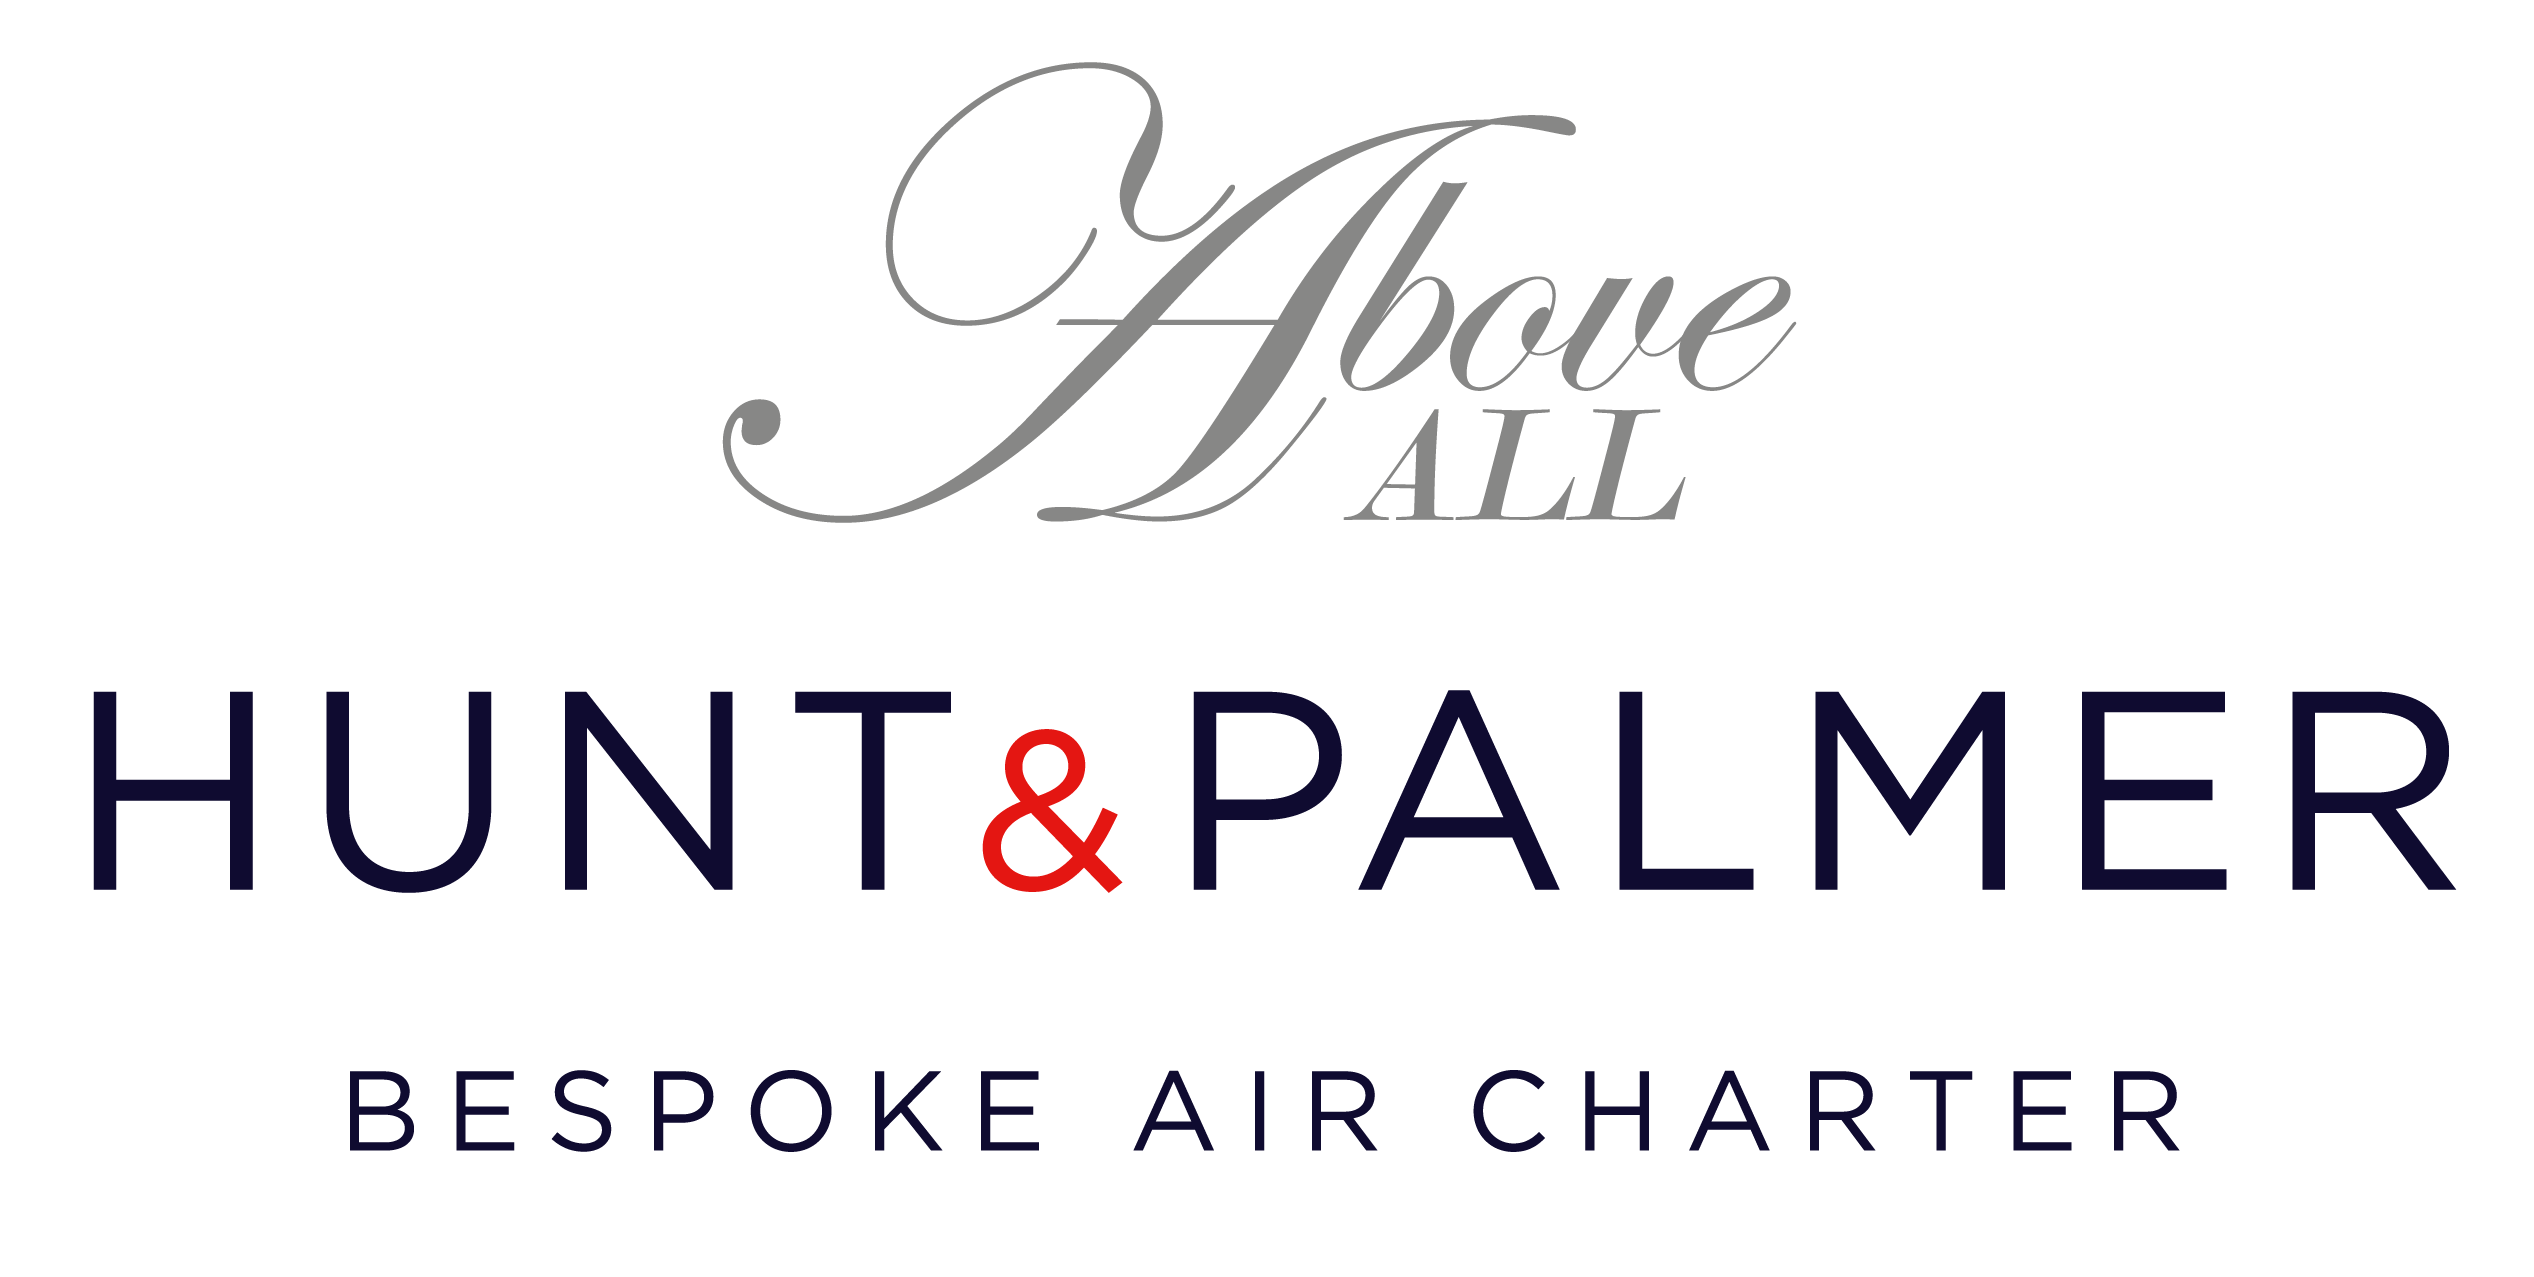 Air Charter - Hunt & Palmer picture